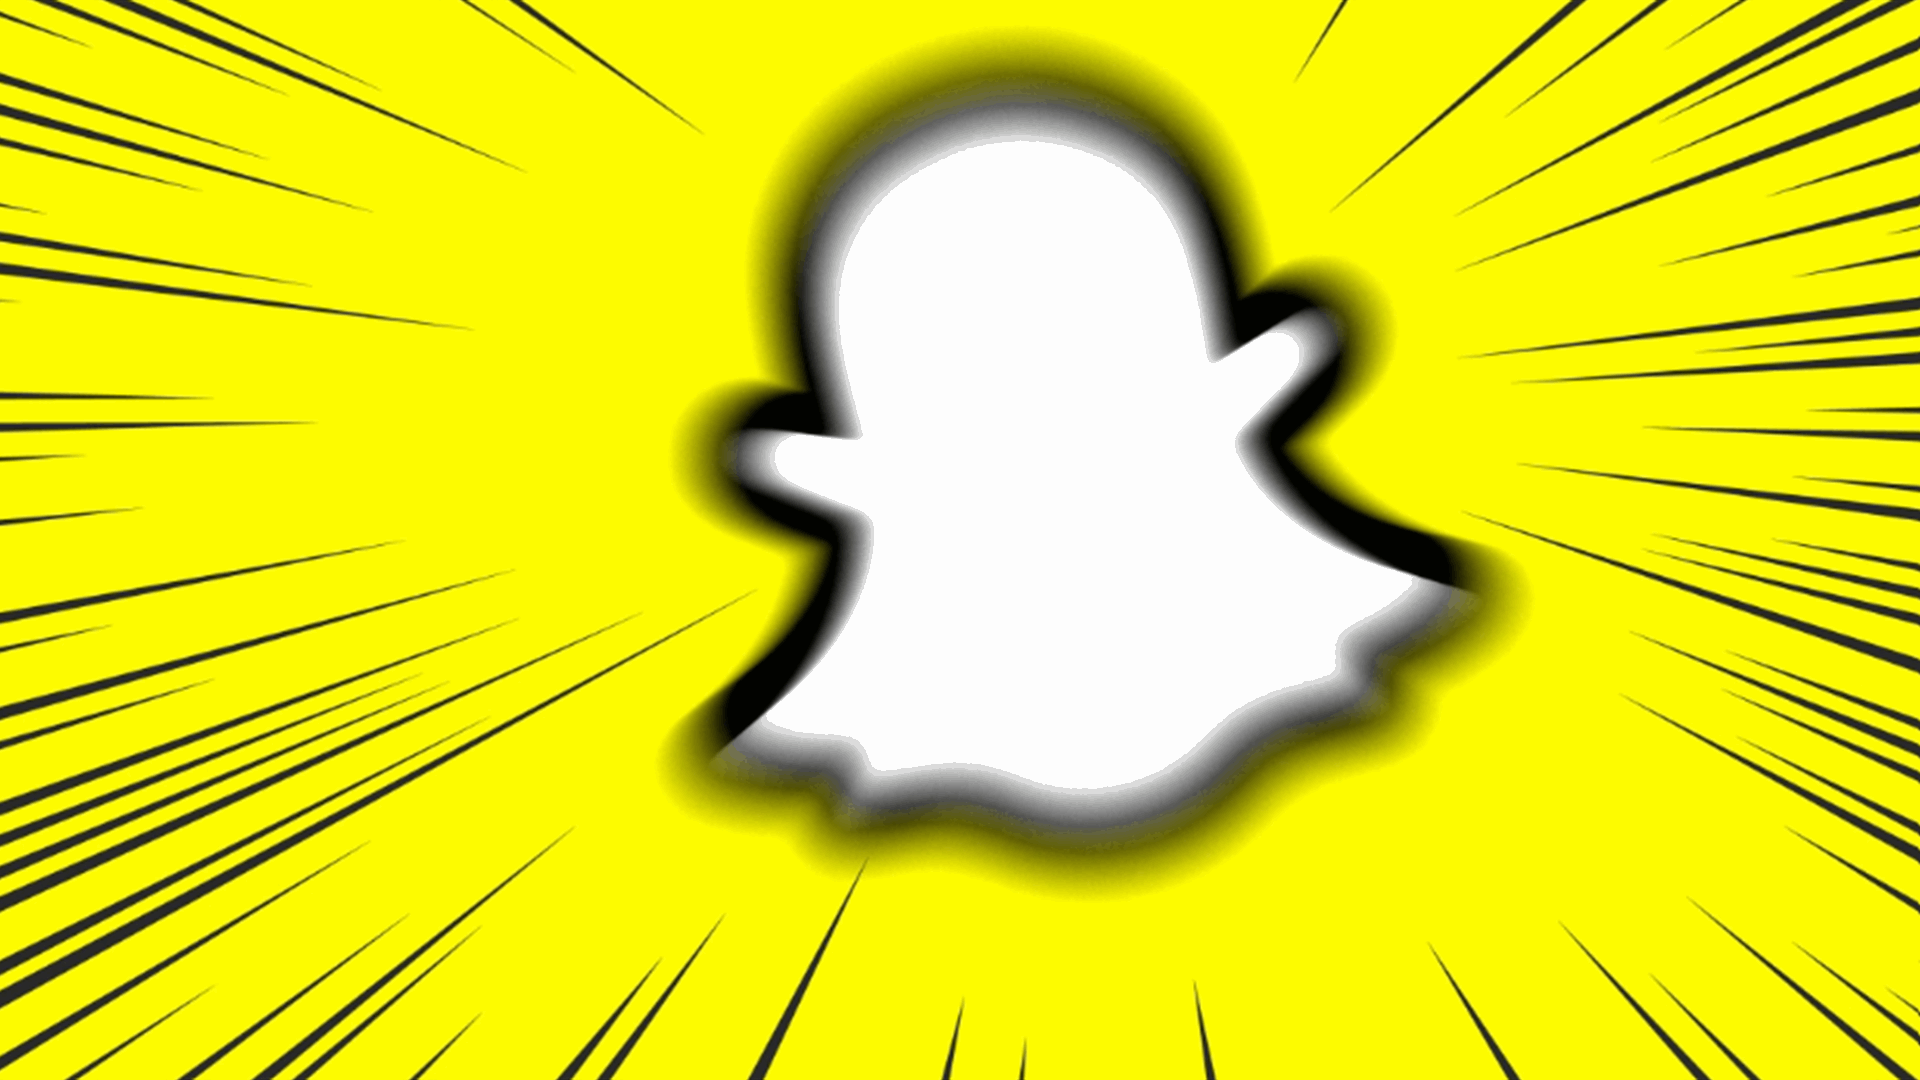 Snap’s revenue woes continue but earnings yield a few bright spots